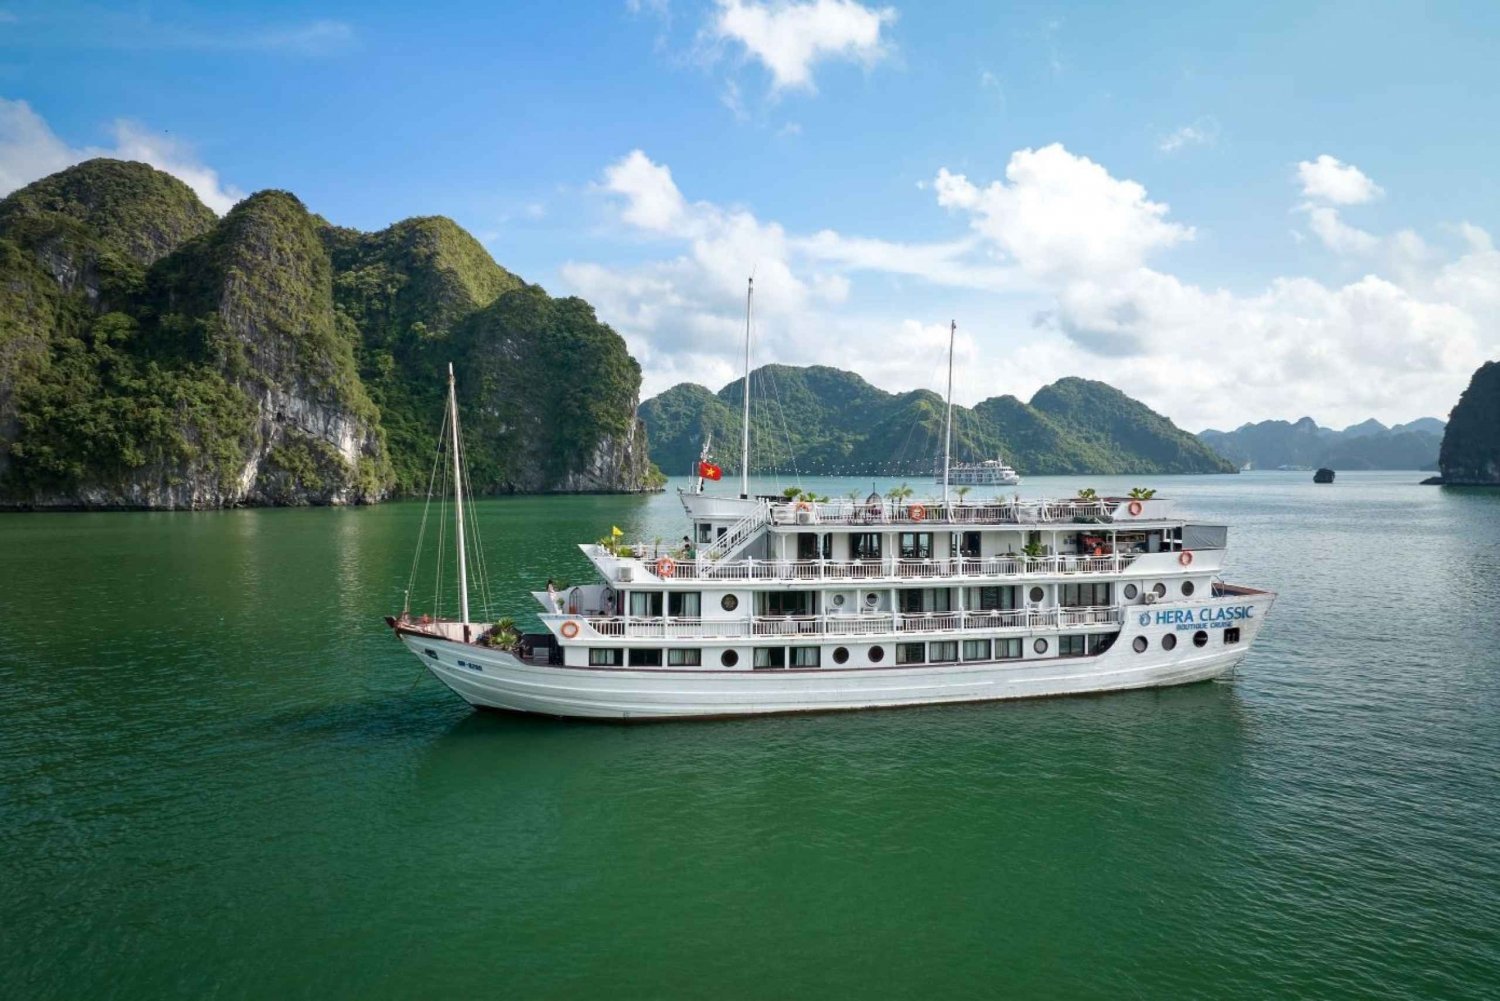 From Hanoi: 2-Day Ha Long Bay Cruise and Surprise Cave Kayak